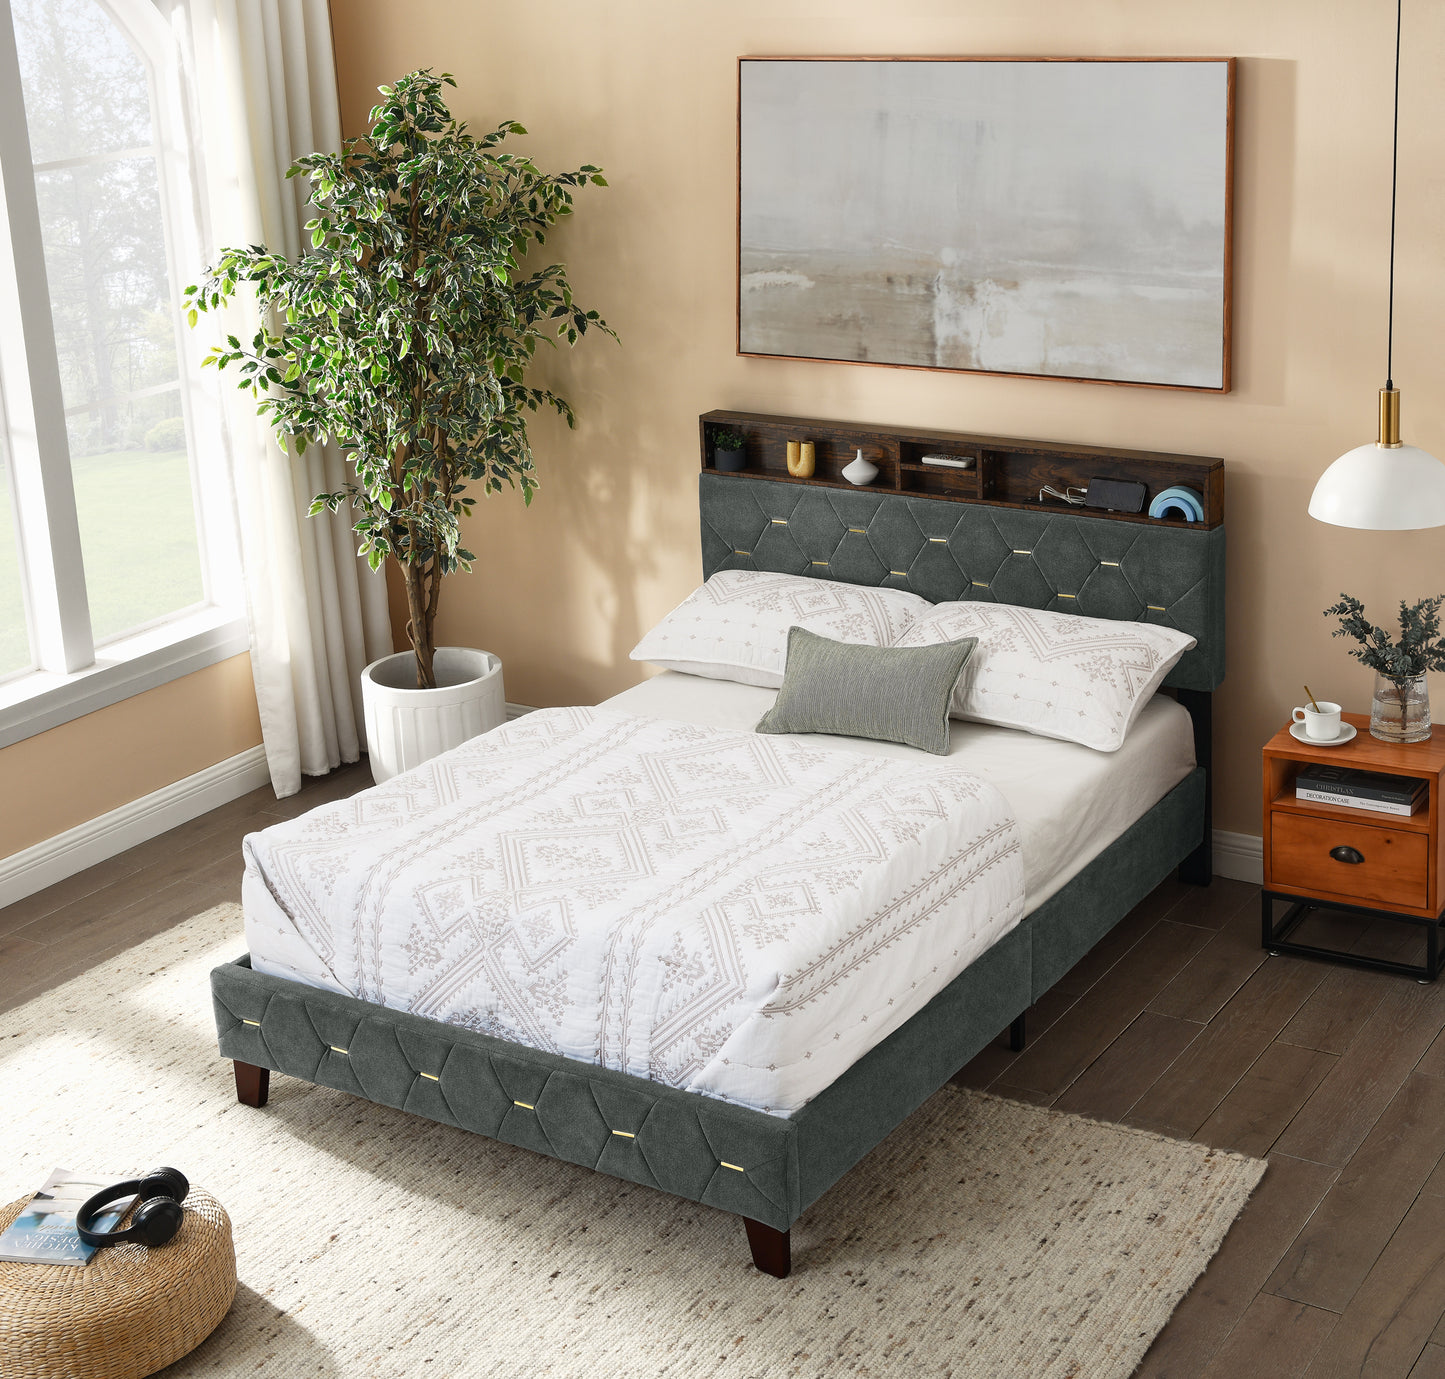 Full Size Bed Frame, Shelf Upholstered Headboard, Platform Bed with Outlet & USB Ports, Wood Legs, No Box Spring Needed, Easy Assembly, Grey